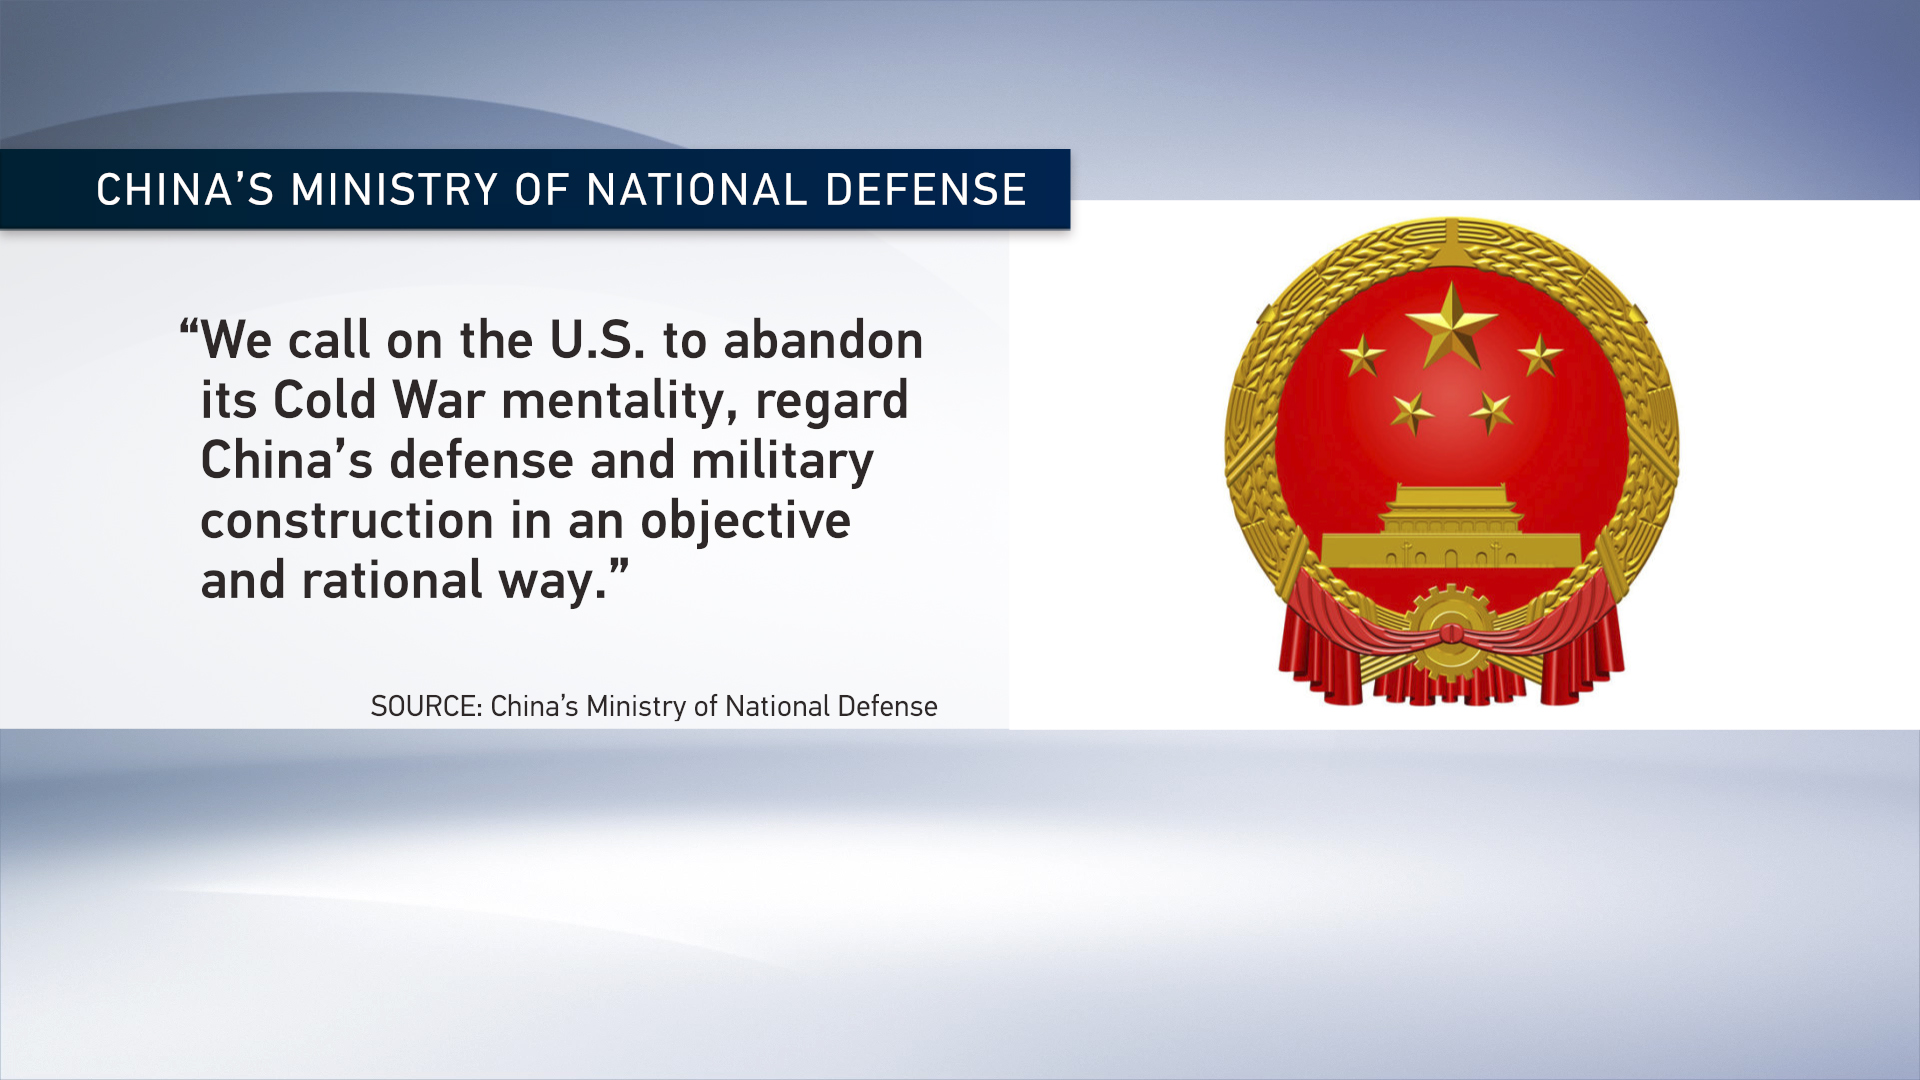 Beijing blasts US report critical of Chinese military